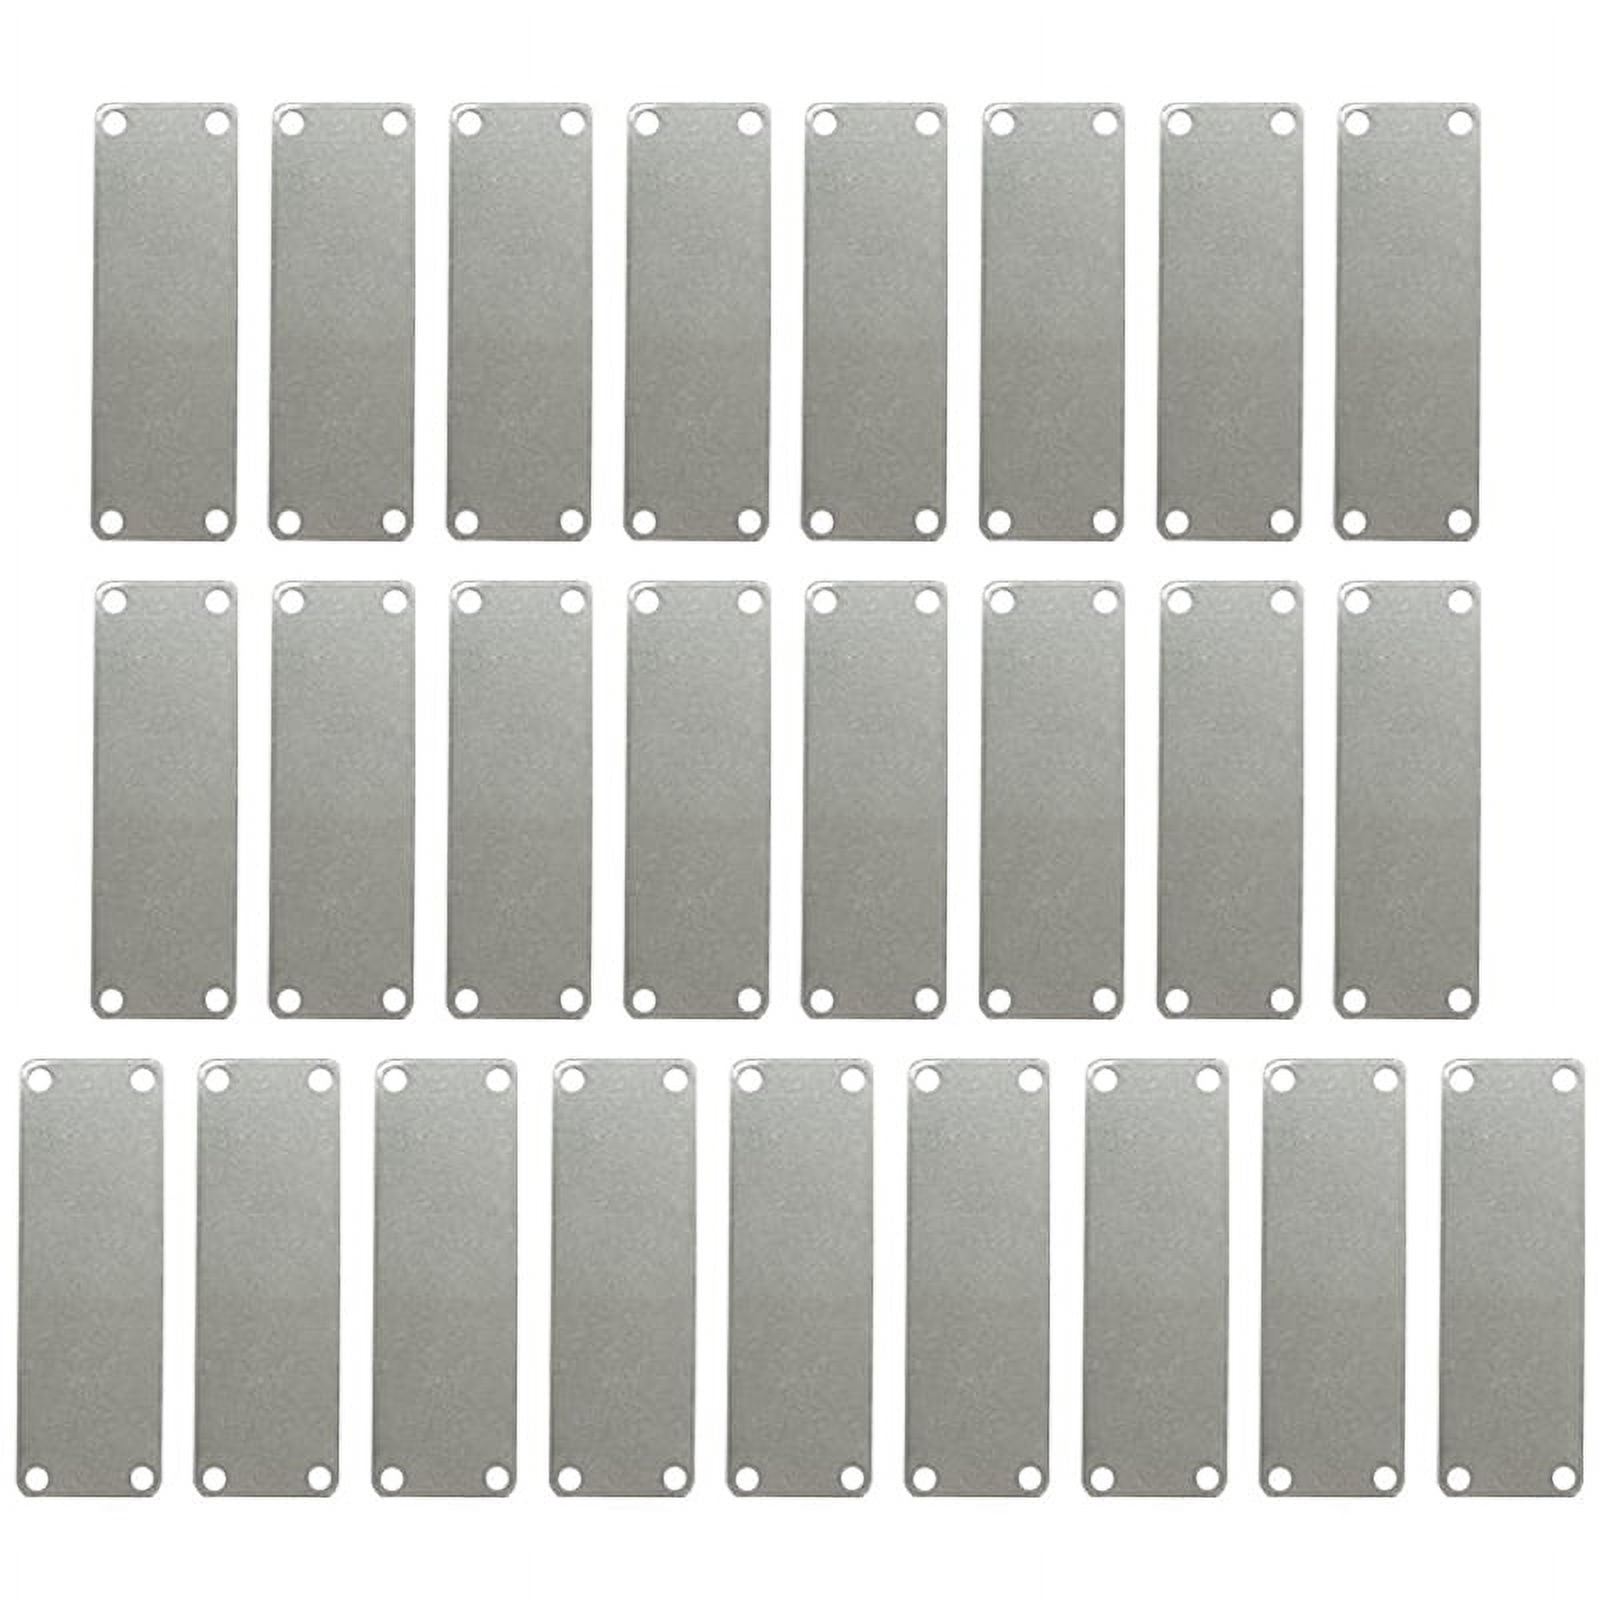 StayMax Oval Stamping Blanks with Hole Aluminum Blank Tags 25 Pack (Silver)